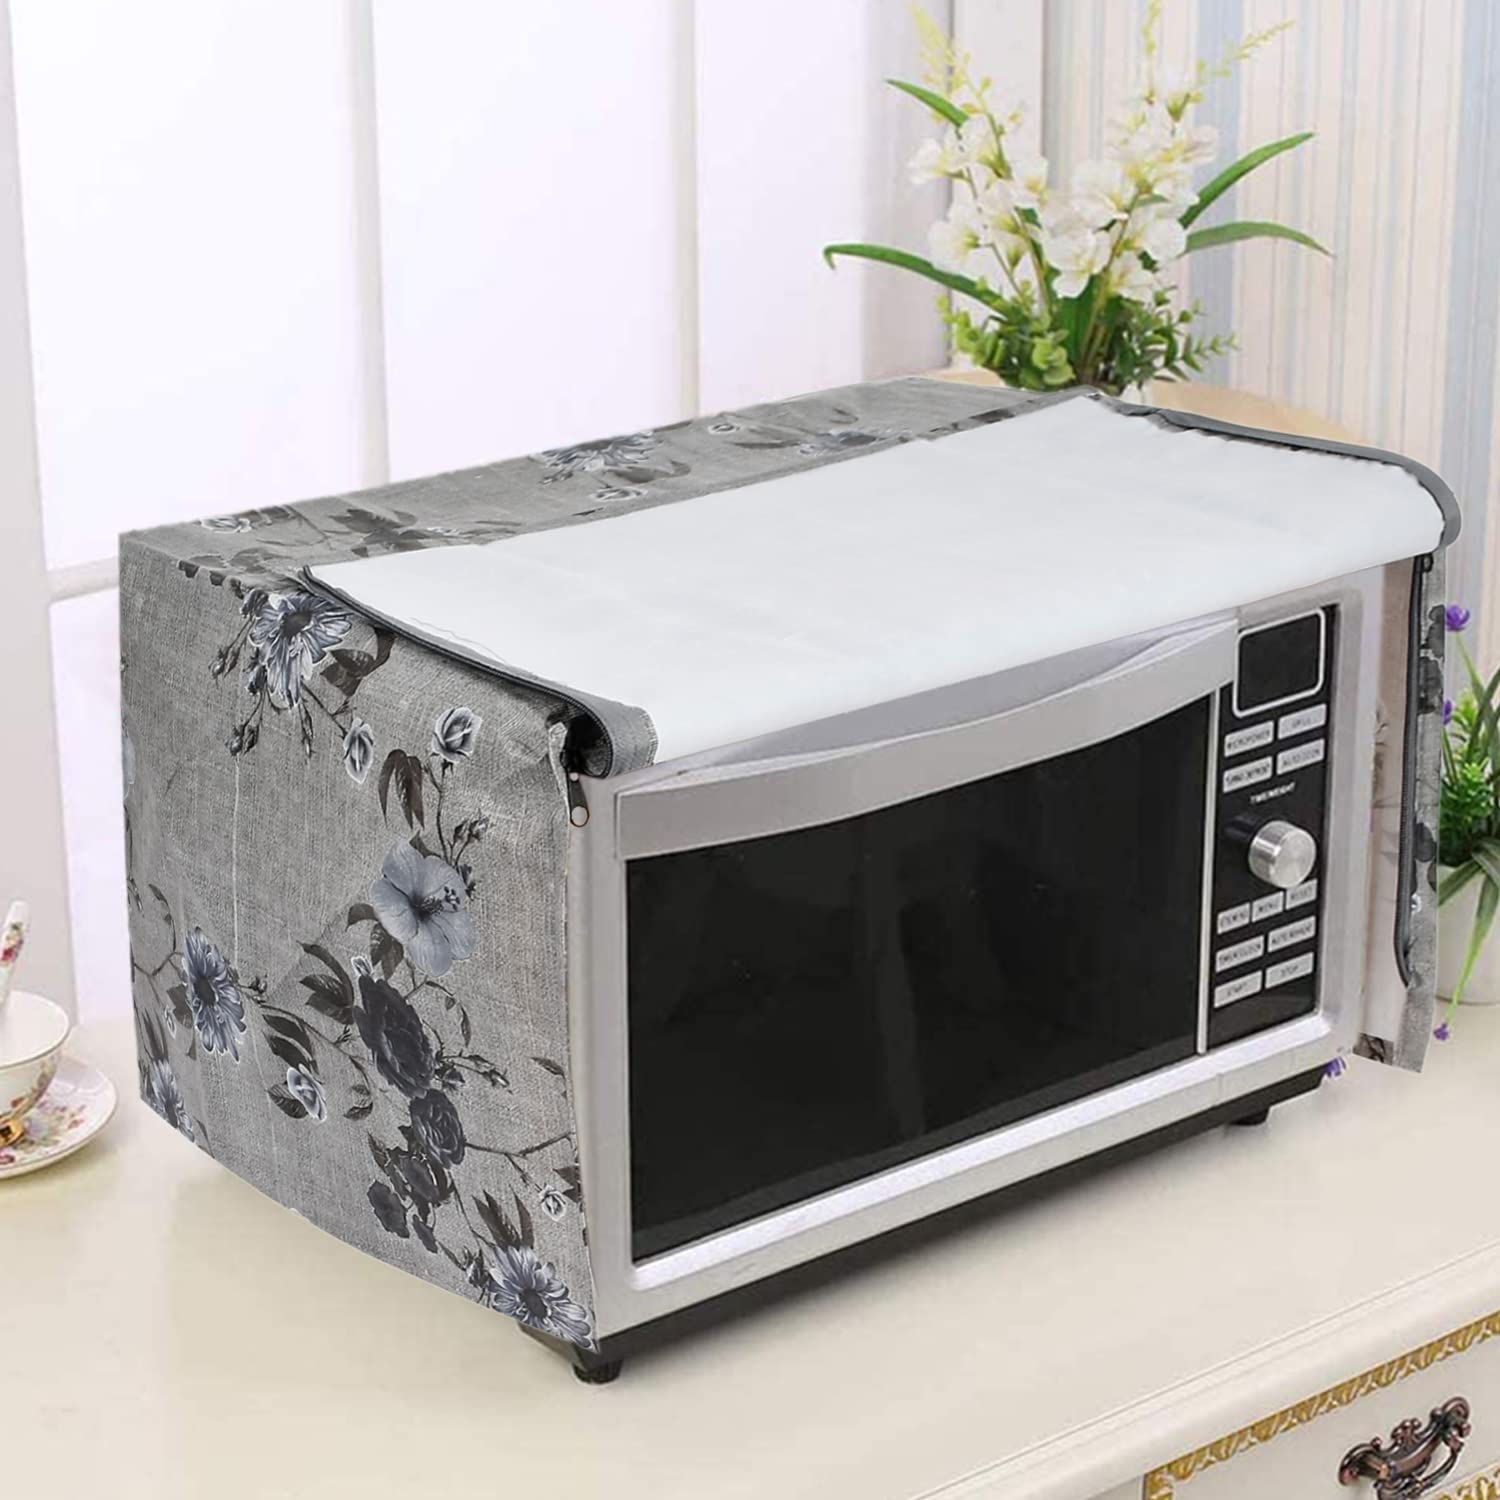 Kuber Industries PVC Flower Printed Microwave Oven Cover,30 LTR. (Grey)-50KM01264